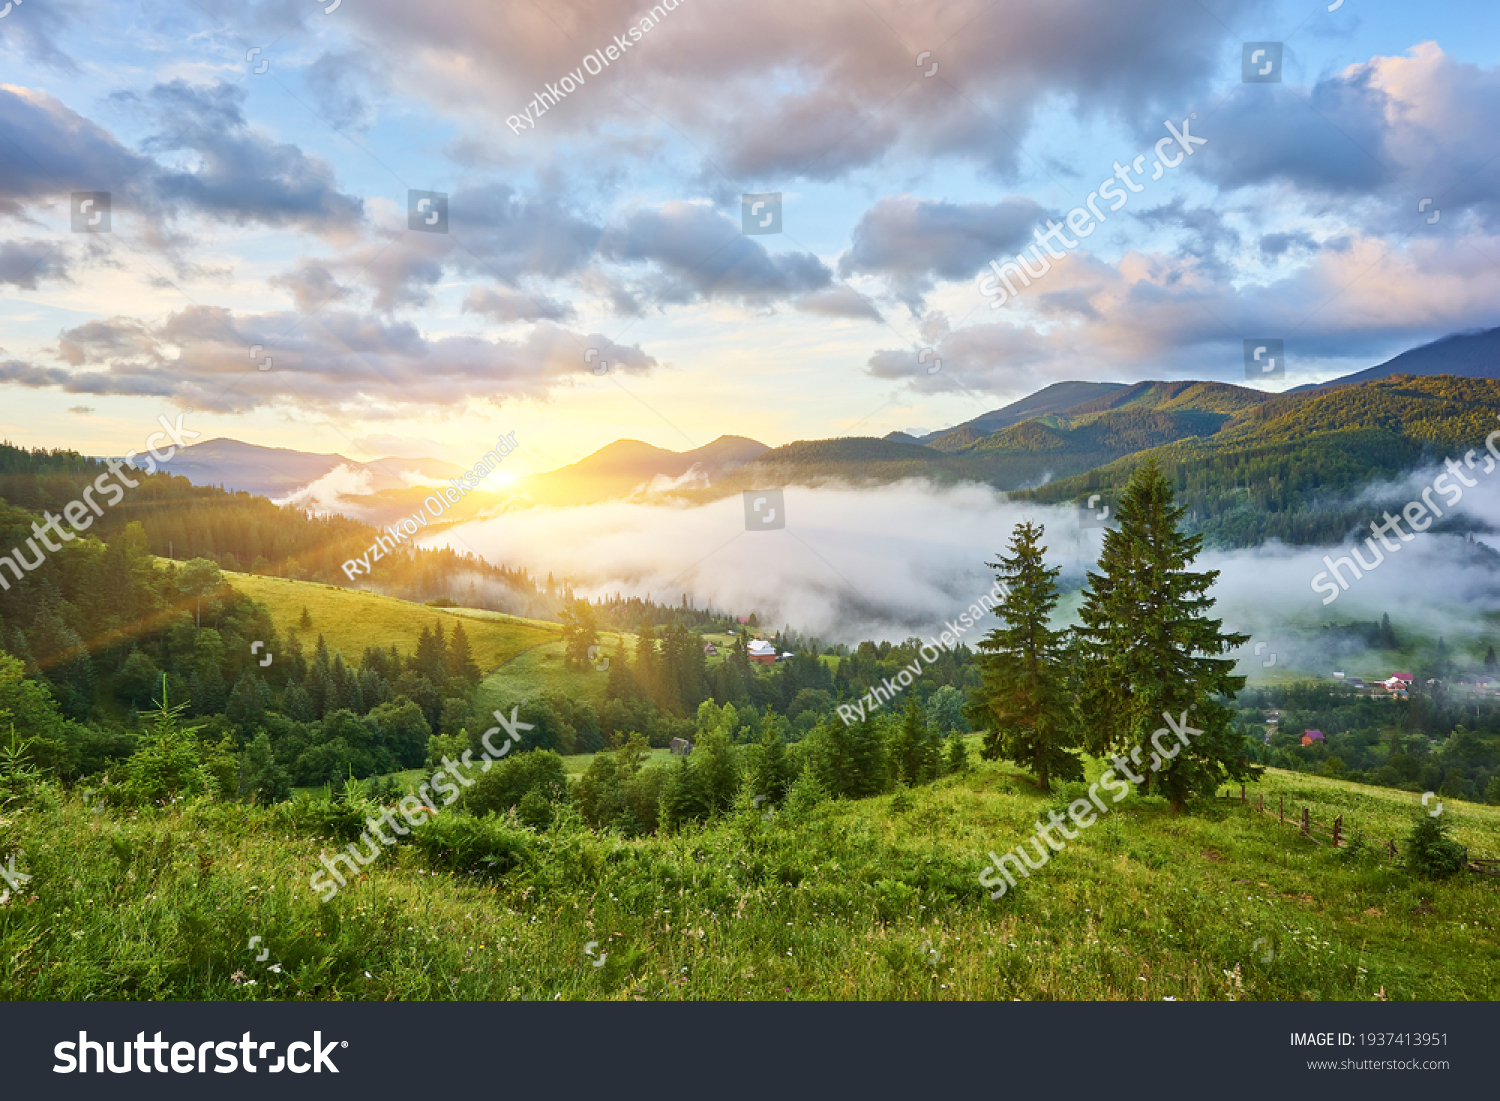 Landscape with fog in mountains and rows of trees #1937413951